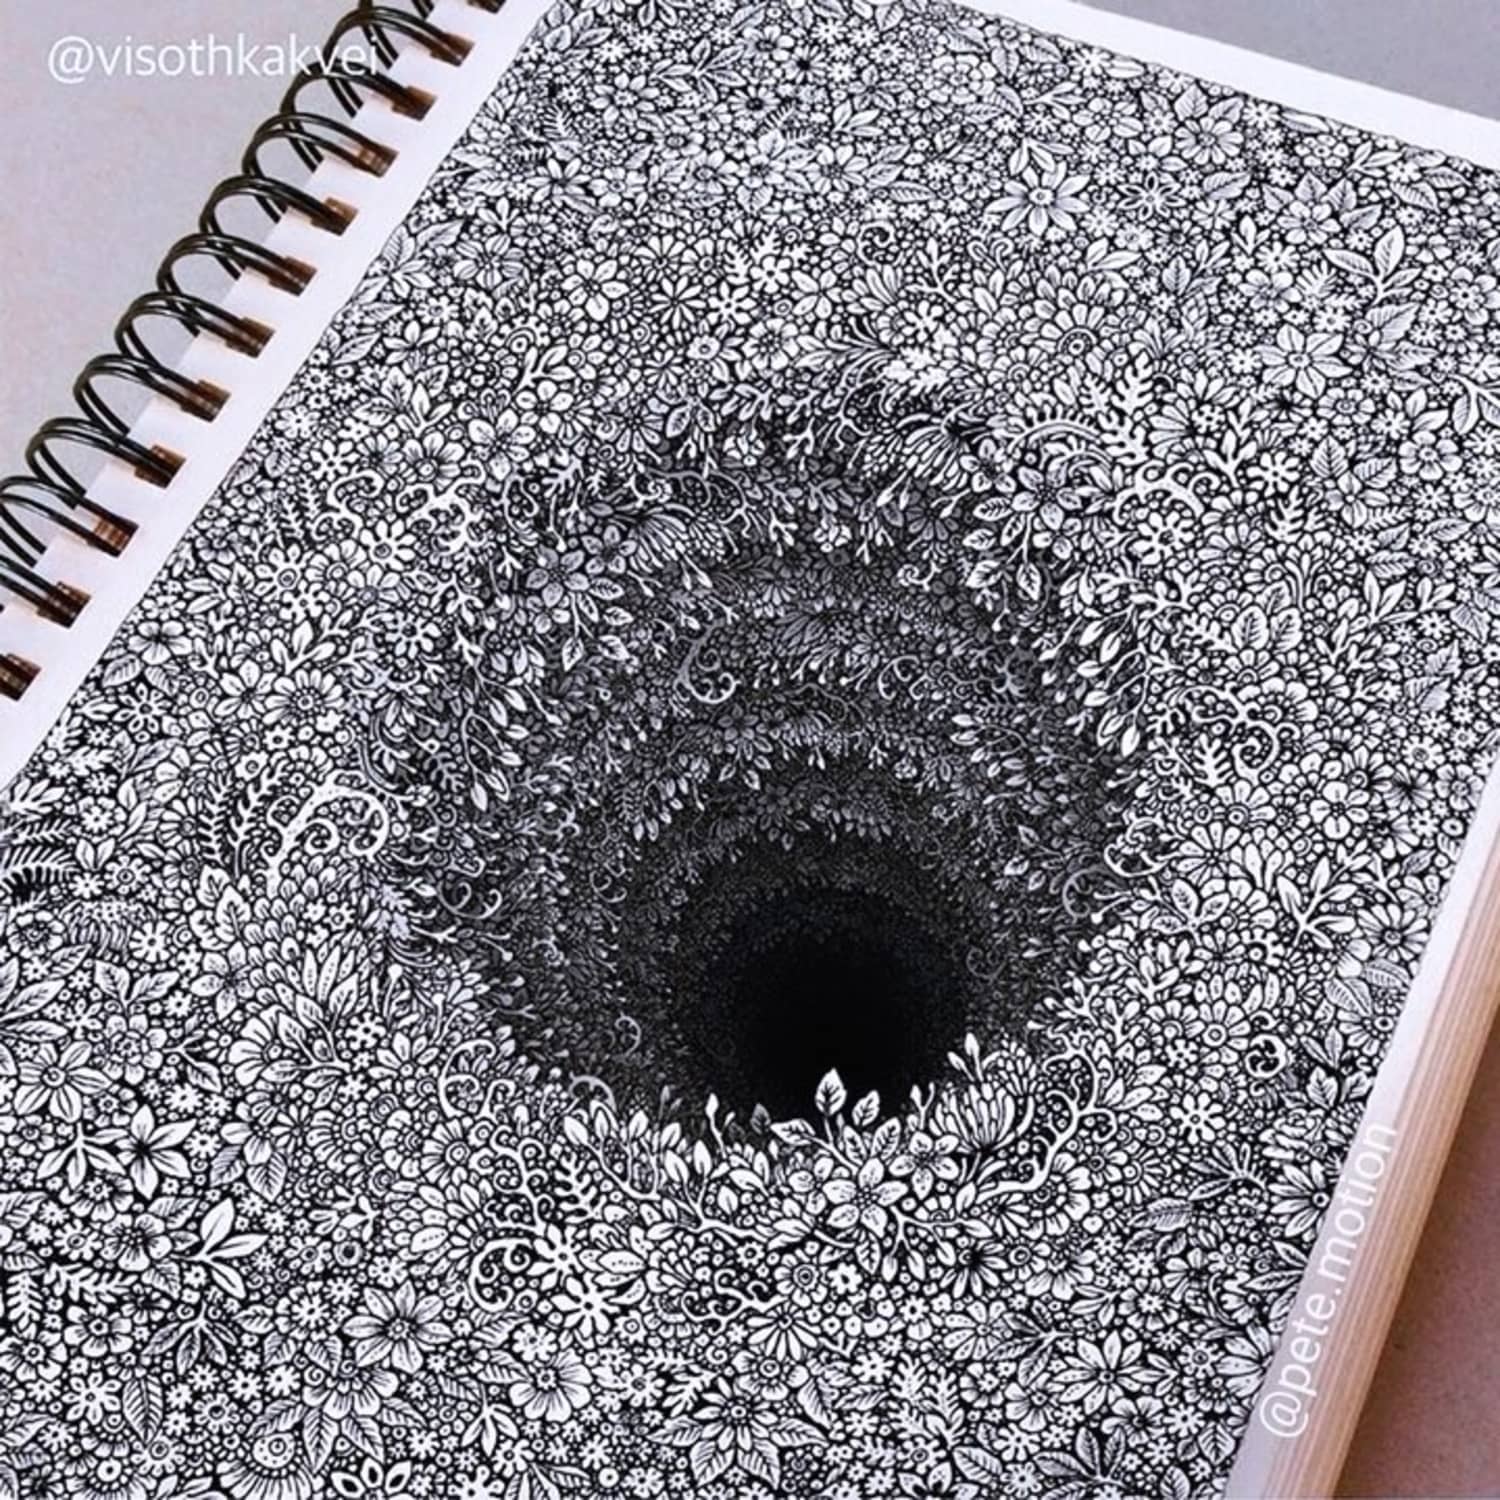 This Artist’s 3D Illusions Have Over 900K Instagram Fans